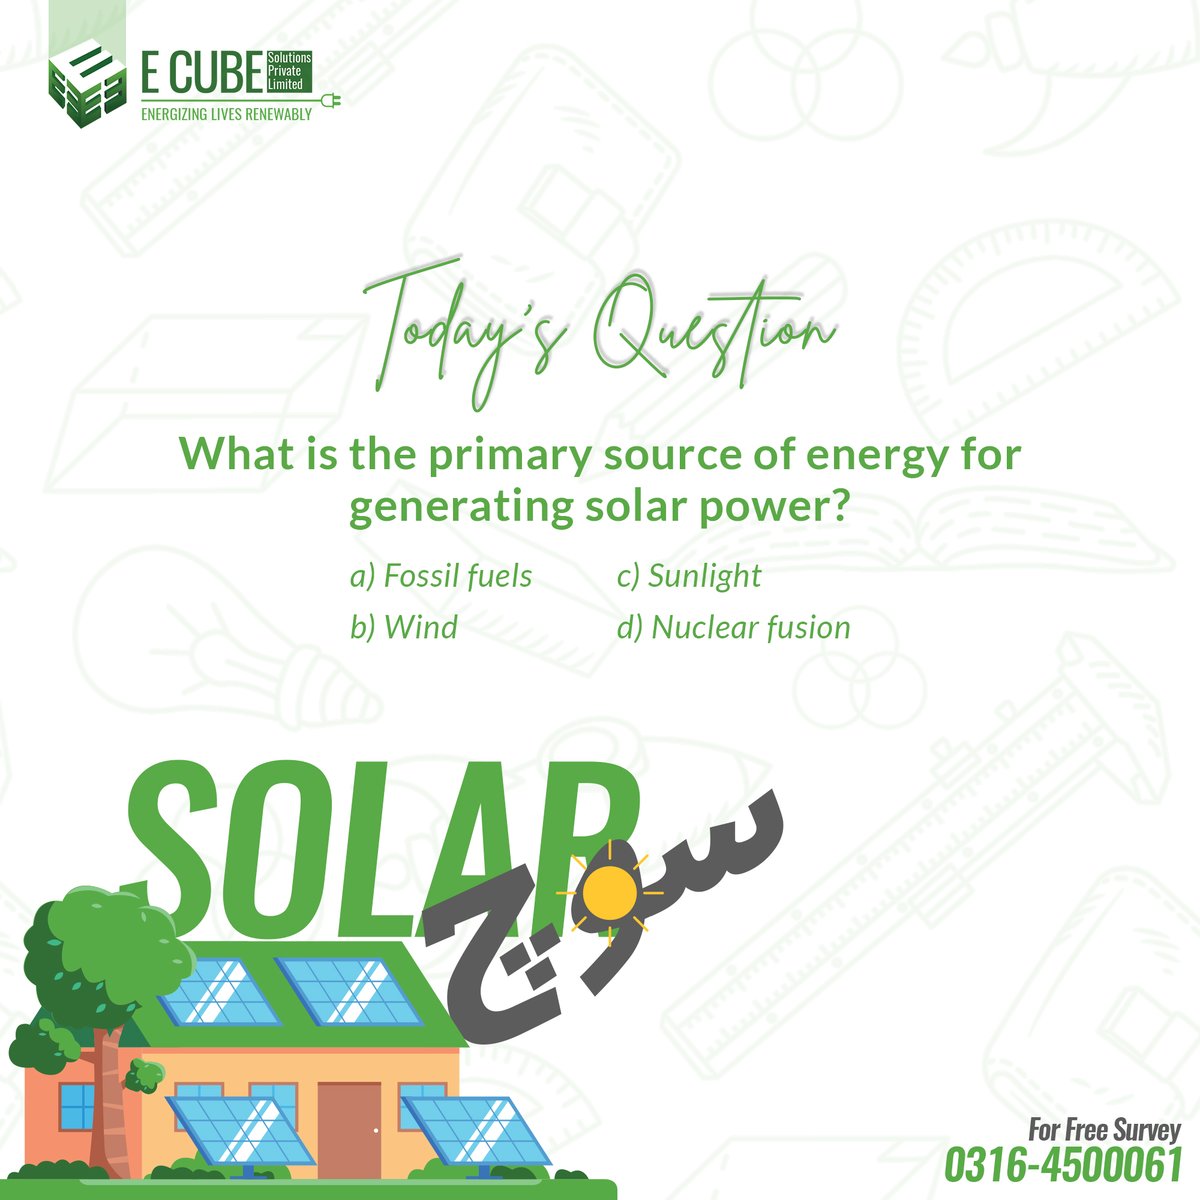 Let's brighten up our day with some Solar Soch! ☀️ 
How about a little brain workout with some sunny questions about solar energy? 🧠💡

#ecubesolutionspvtltd #ecube #solar #ecubesolar #teamecube #EcubeSolarSoch